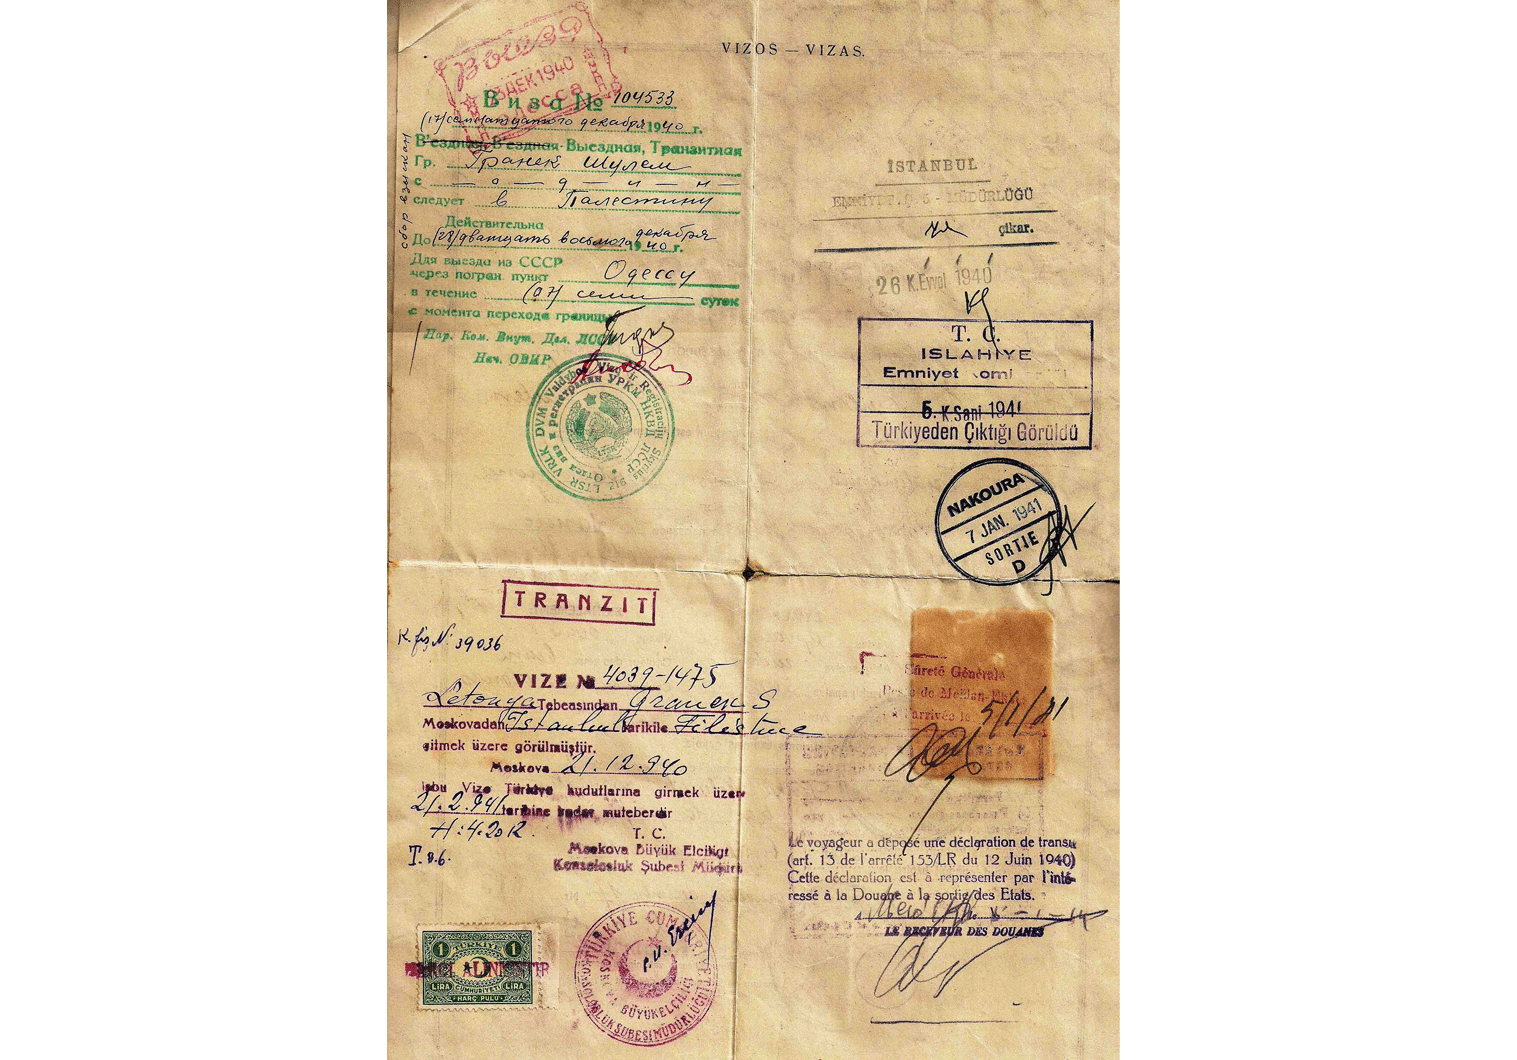 1940 Lithuanian Refugee travel certificate